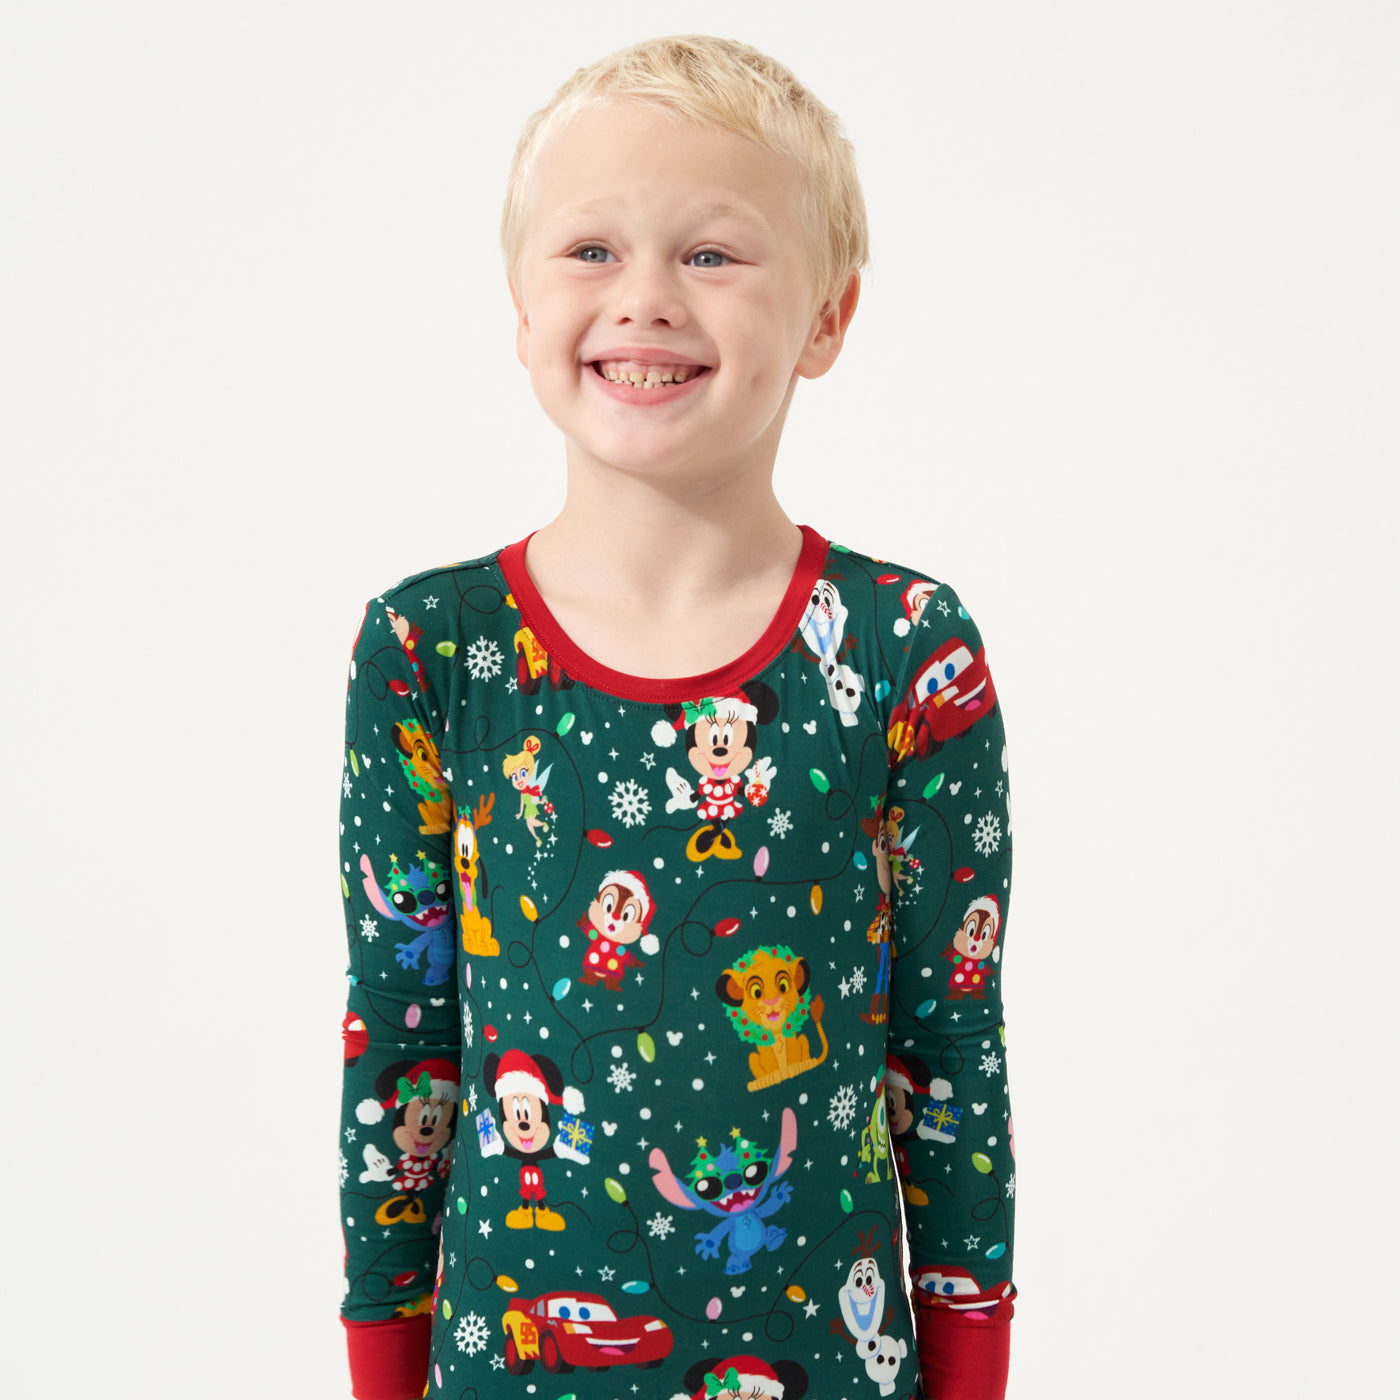 Alternate close up image of a child wearing a Disney Christmas Party two piece pajama set